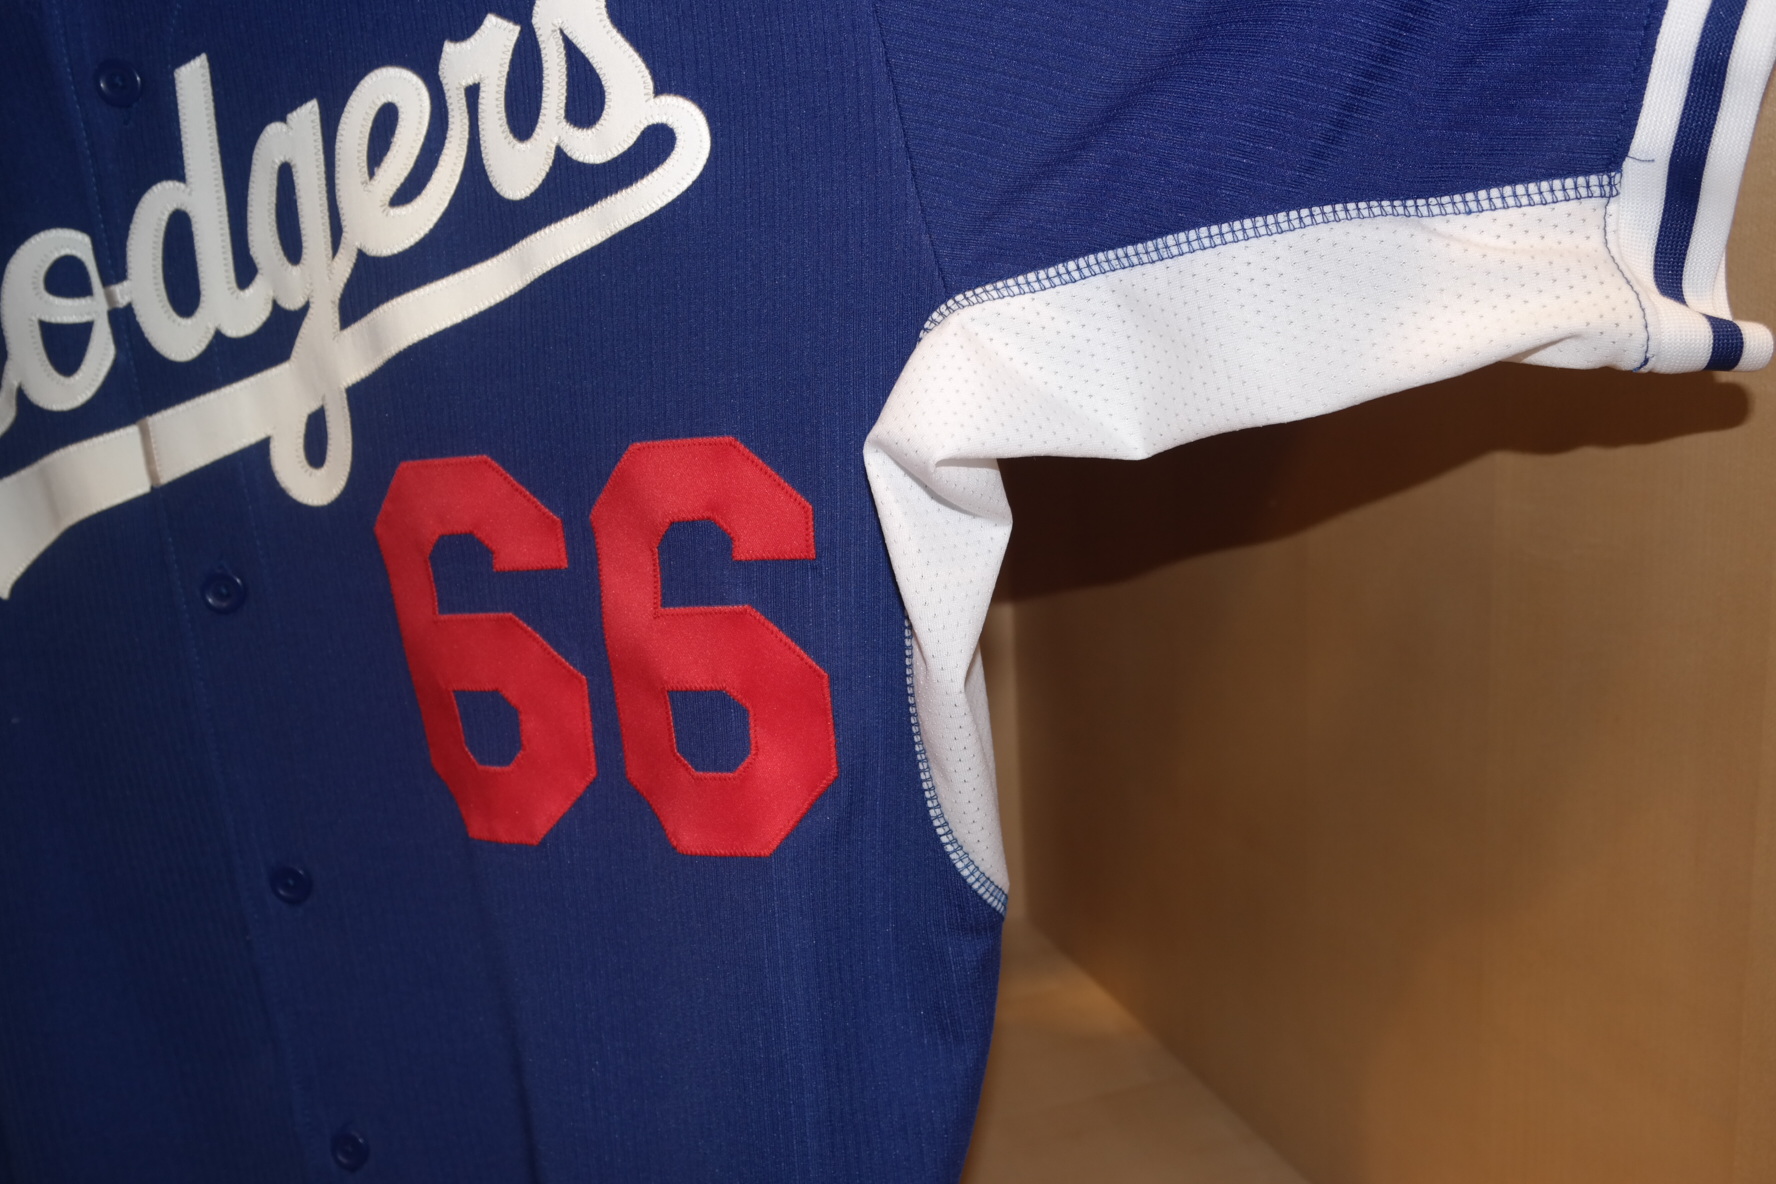 COREY SEAGER BATTING PRACTICE JERSEY - BP-Used Jersey From The